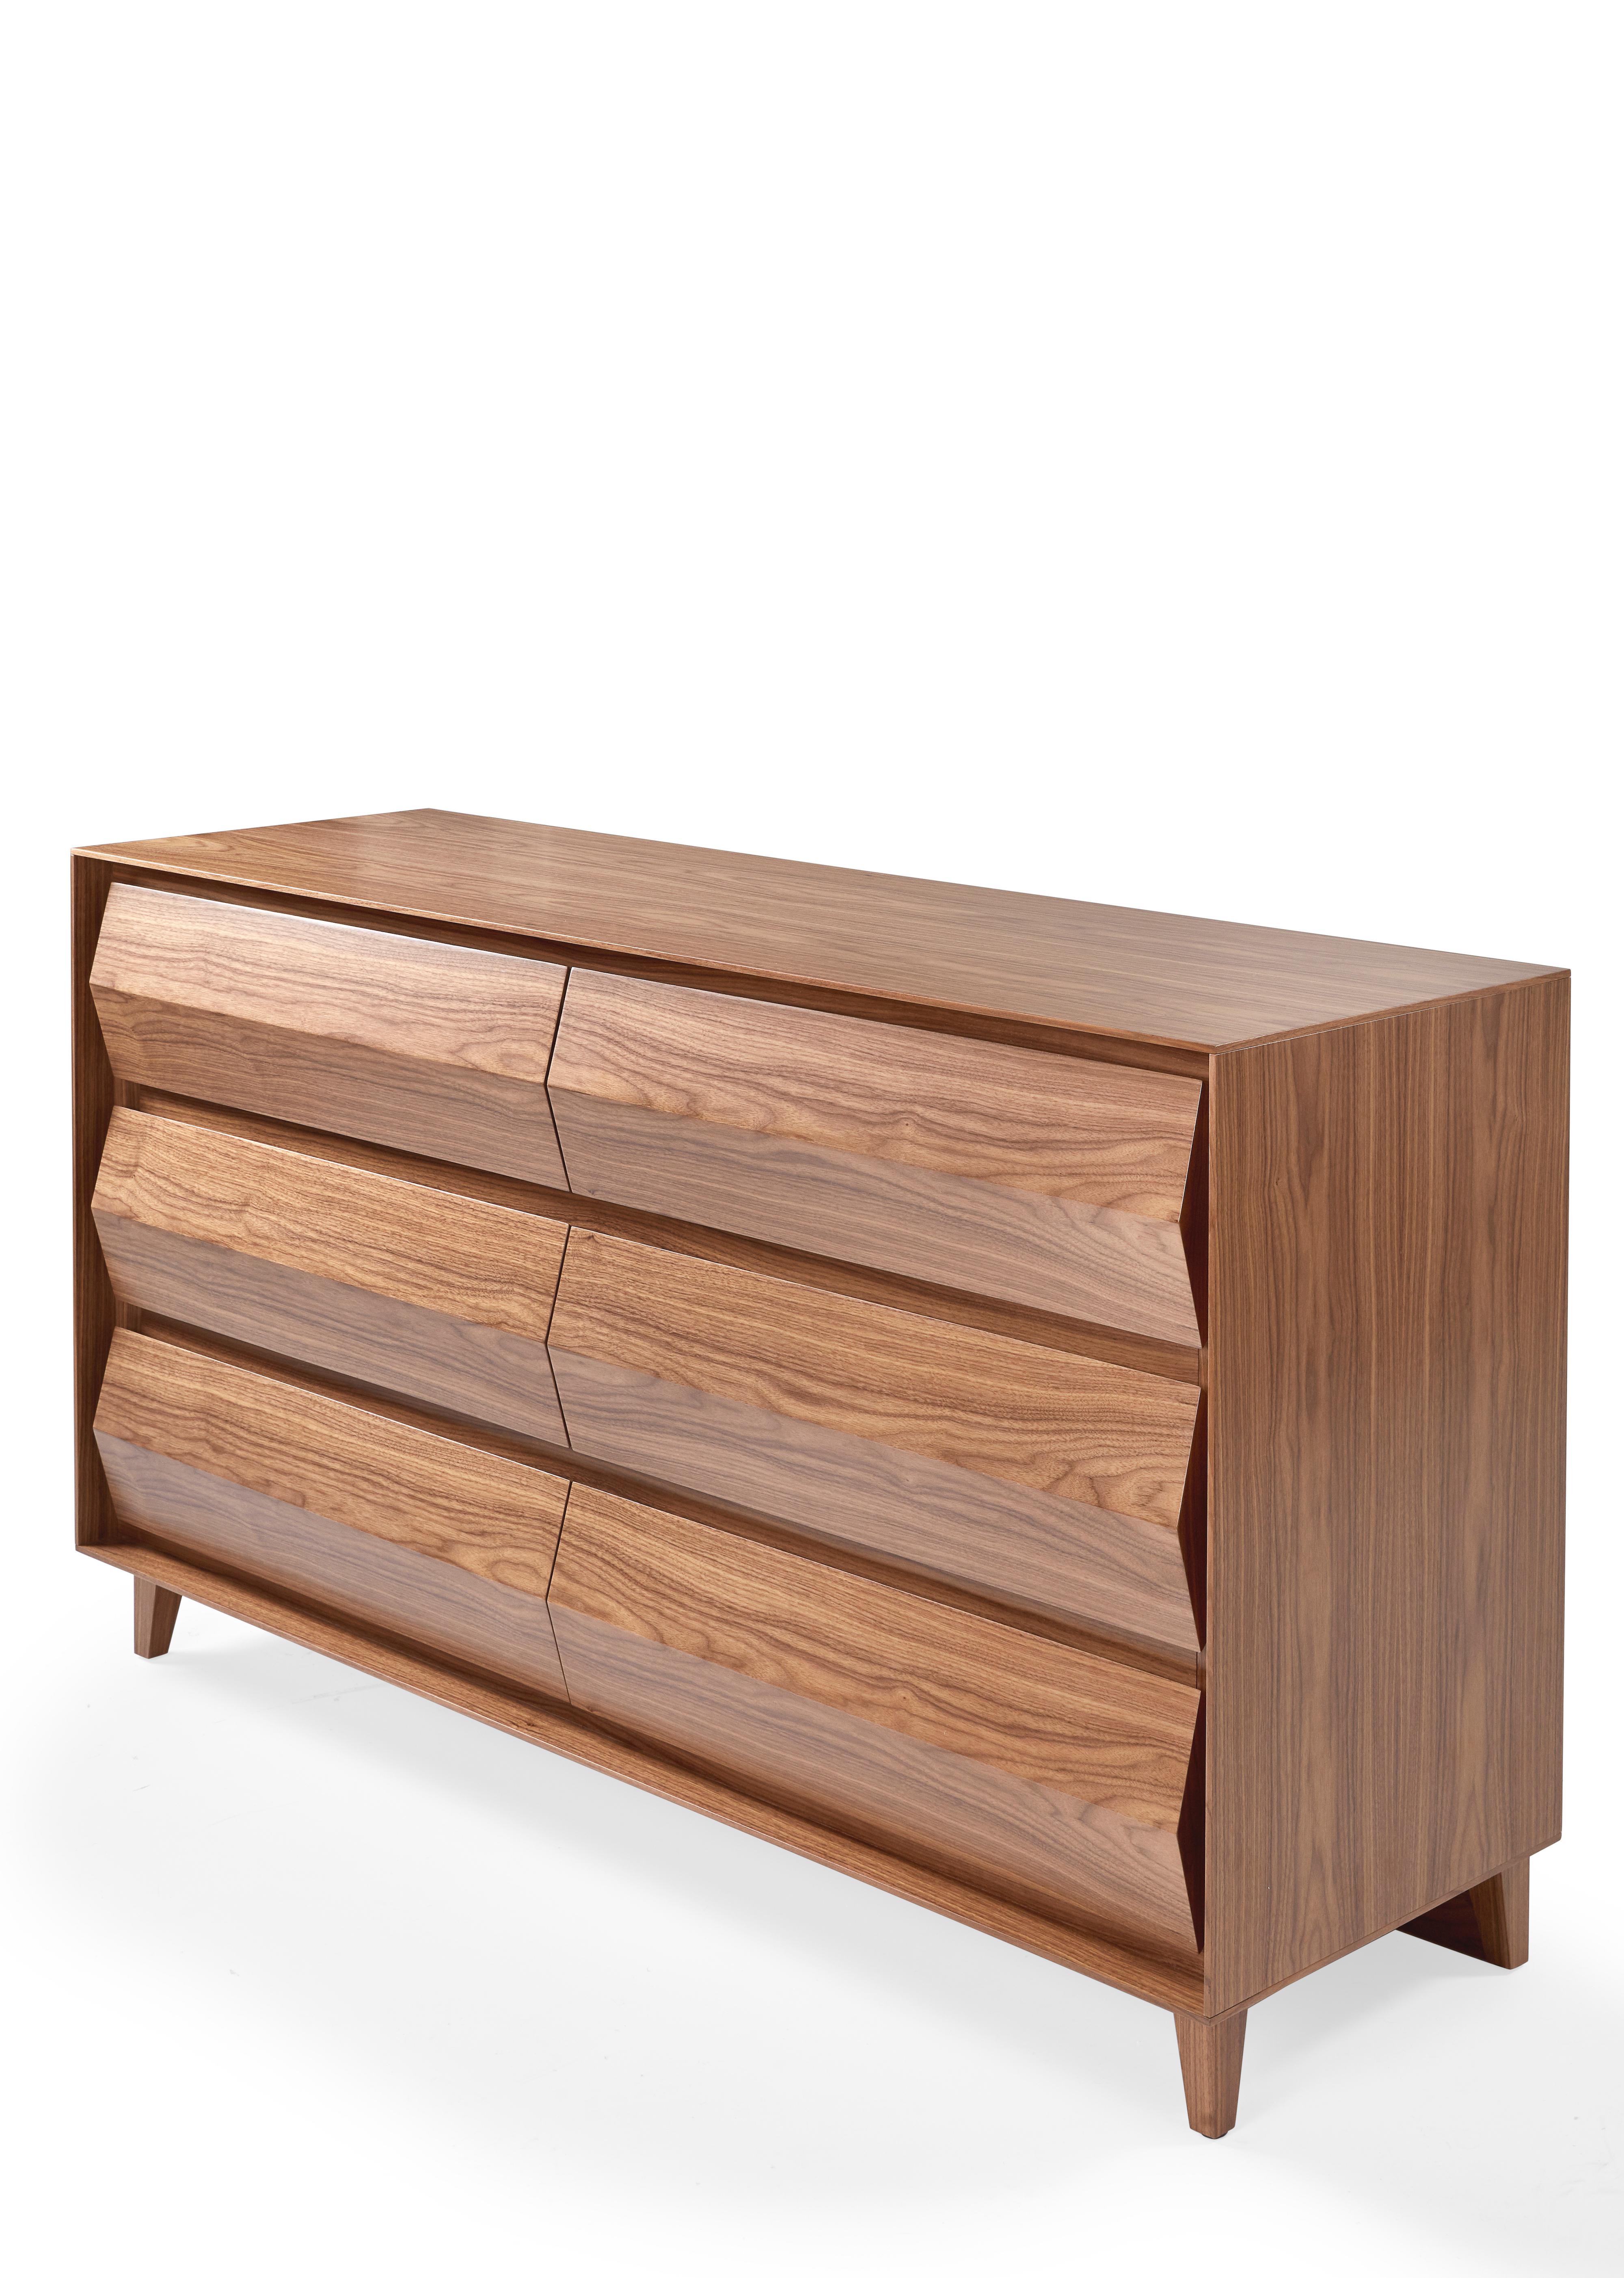 Offering a unique play on reflected light, the angled drawer fronts of the Park Dresser lets the beauty of our natural woods shine. A notched top detail on each drawer allows for easy opening without taking away from the sleek look of the facade.